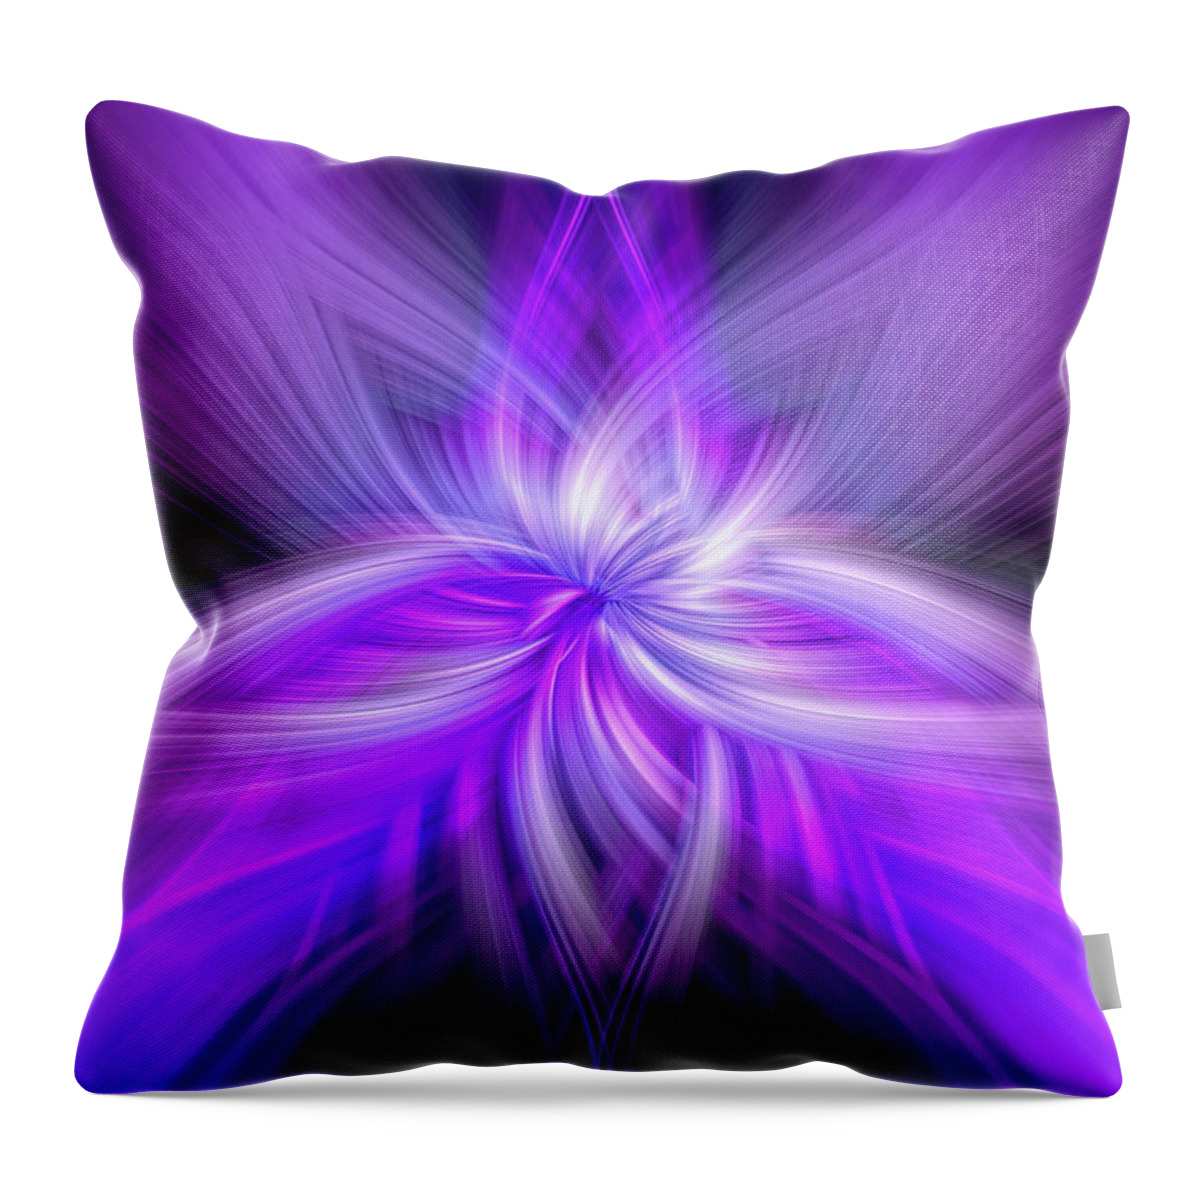 Flora Twirl Throw Pillow featuring the digital art Flora Twirl by Wes and Dotty Weber